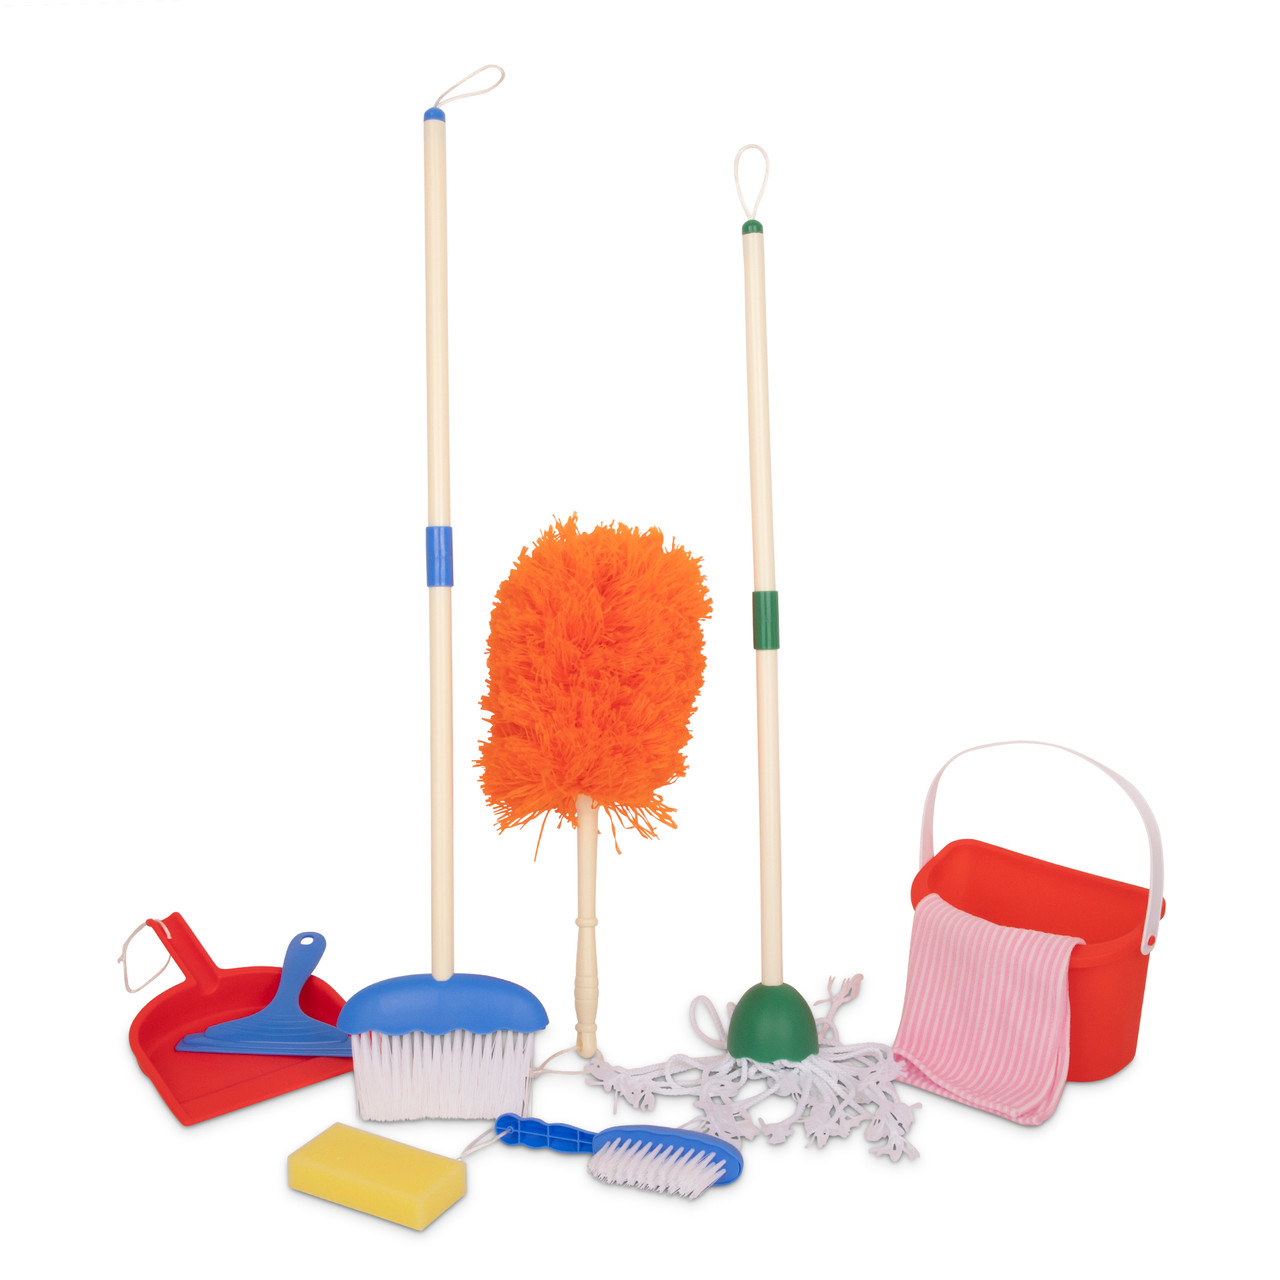 Playkidz Deluxe Cleaning Set, 11Pcs Includes Spray, Mop, Brush, Broom,  Sponge, Squeegee - Play Helper Realistic Housekeeping Set, Recommended for Ages  3+ - Toys 4 U